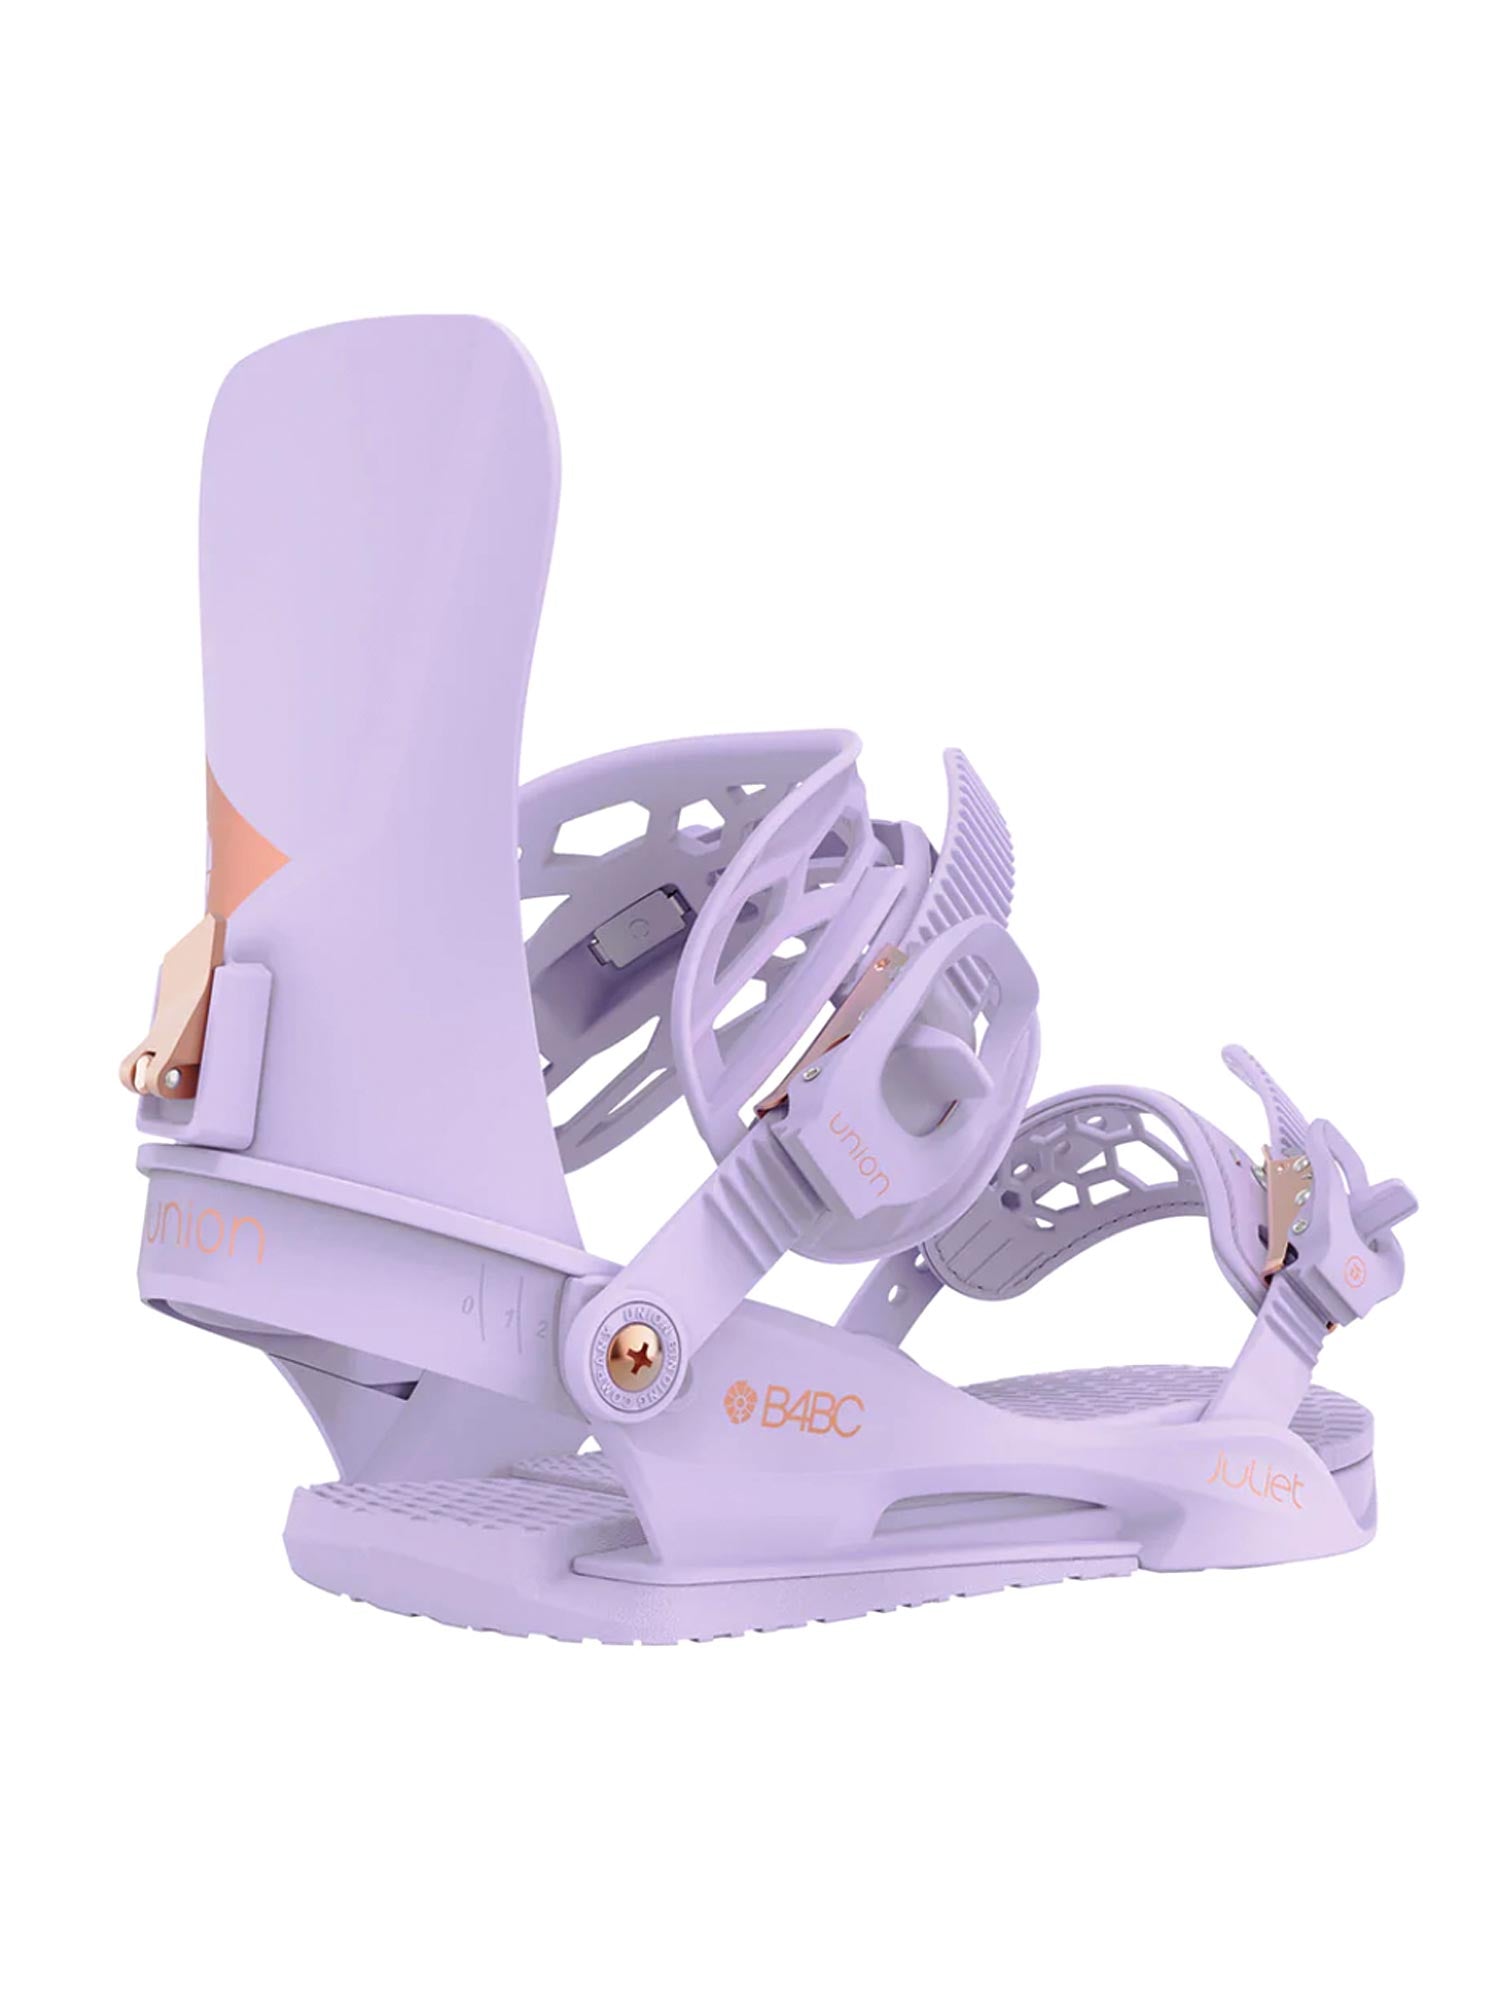 women's Union Juliet snowboard bindings, lavender with rose gold accents